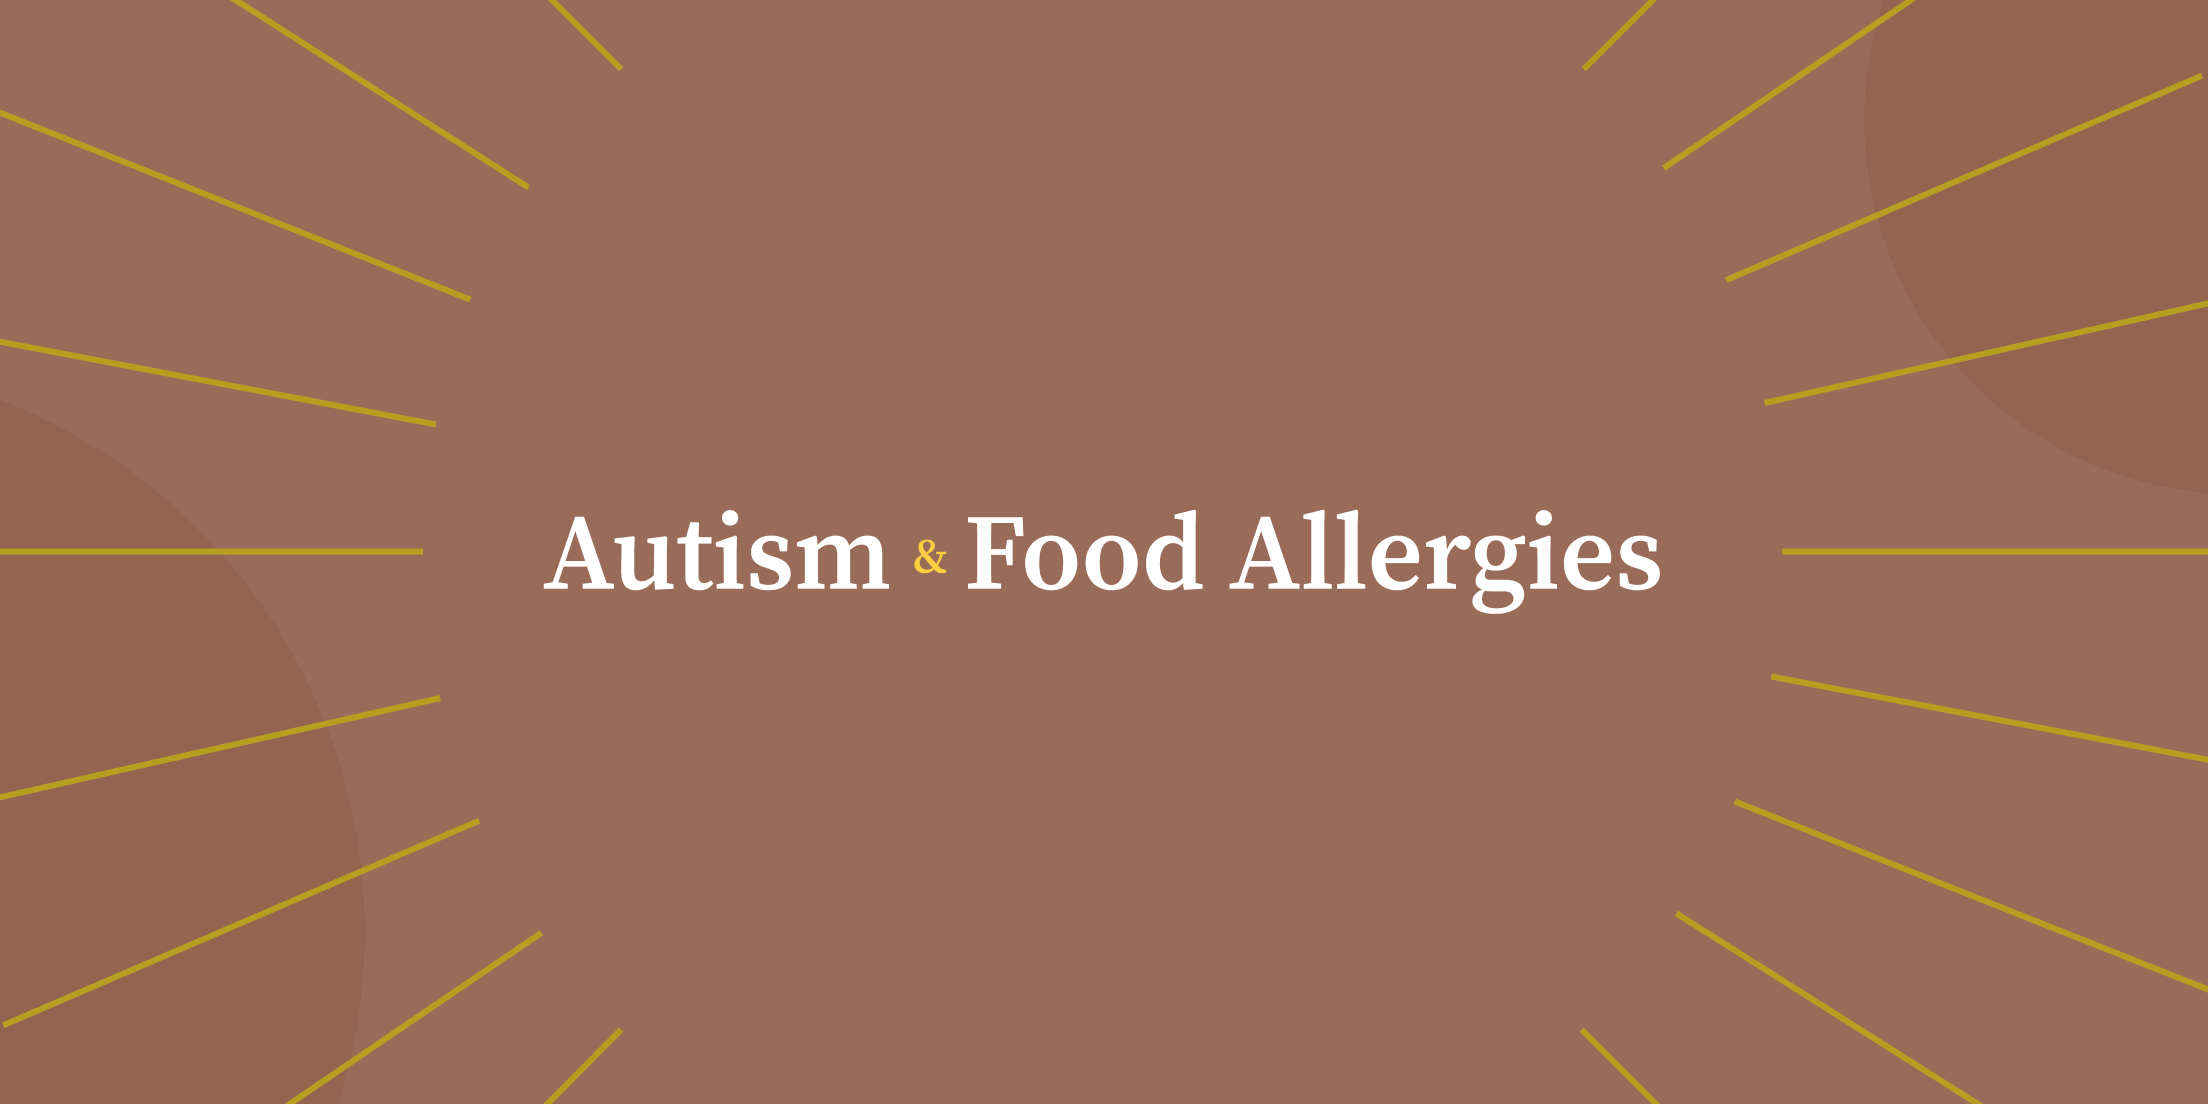 Autism & Food Allergies: Why Is the Connection So Strong?